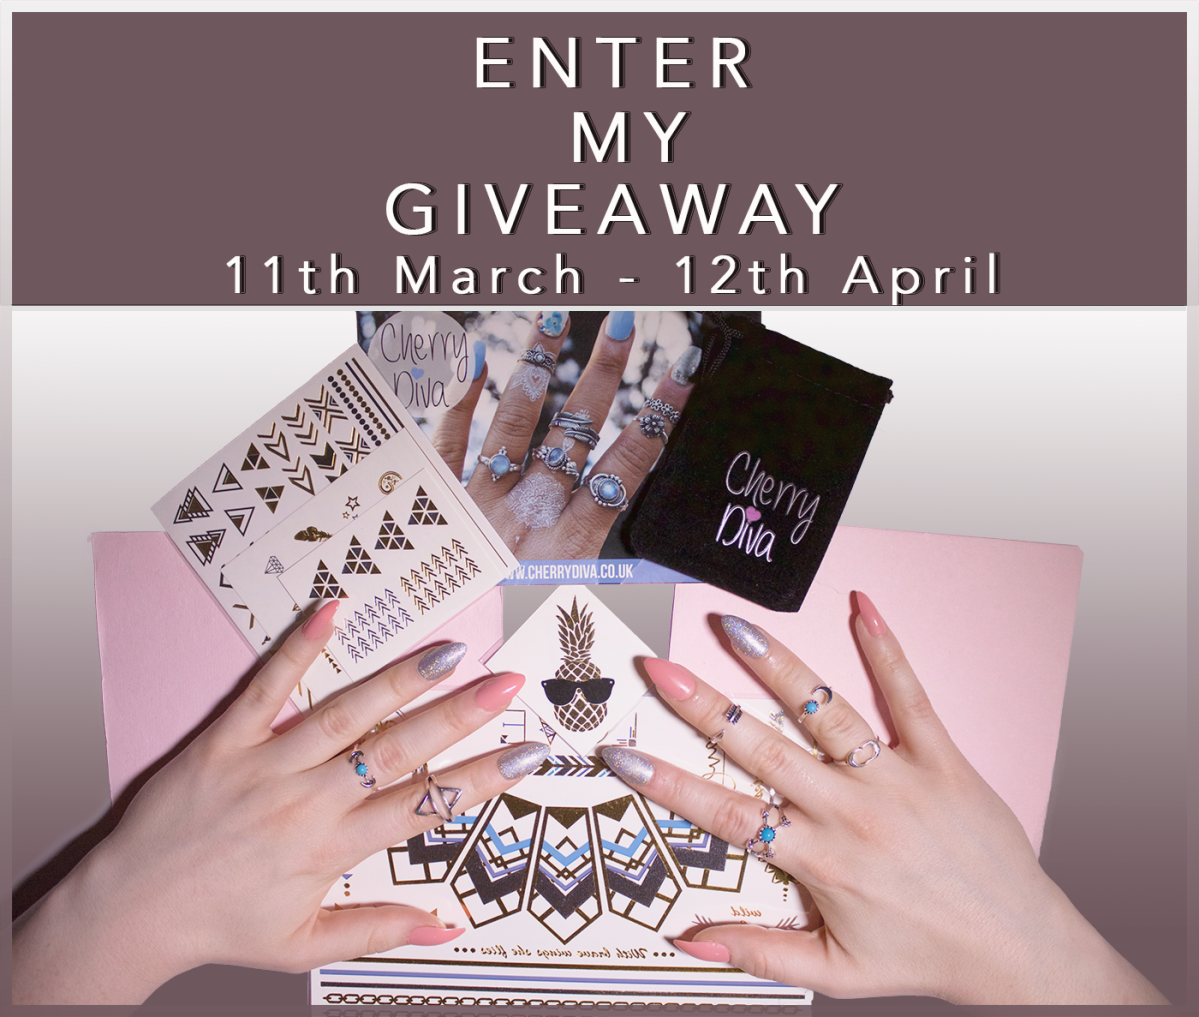 GIVEAWAY: WIN CHERRY DIVA JEWELLERY AND FLASH TATTOOS